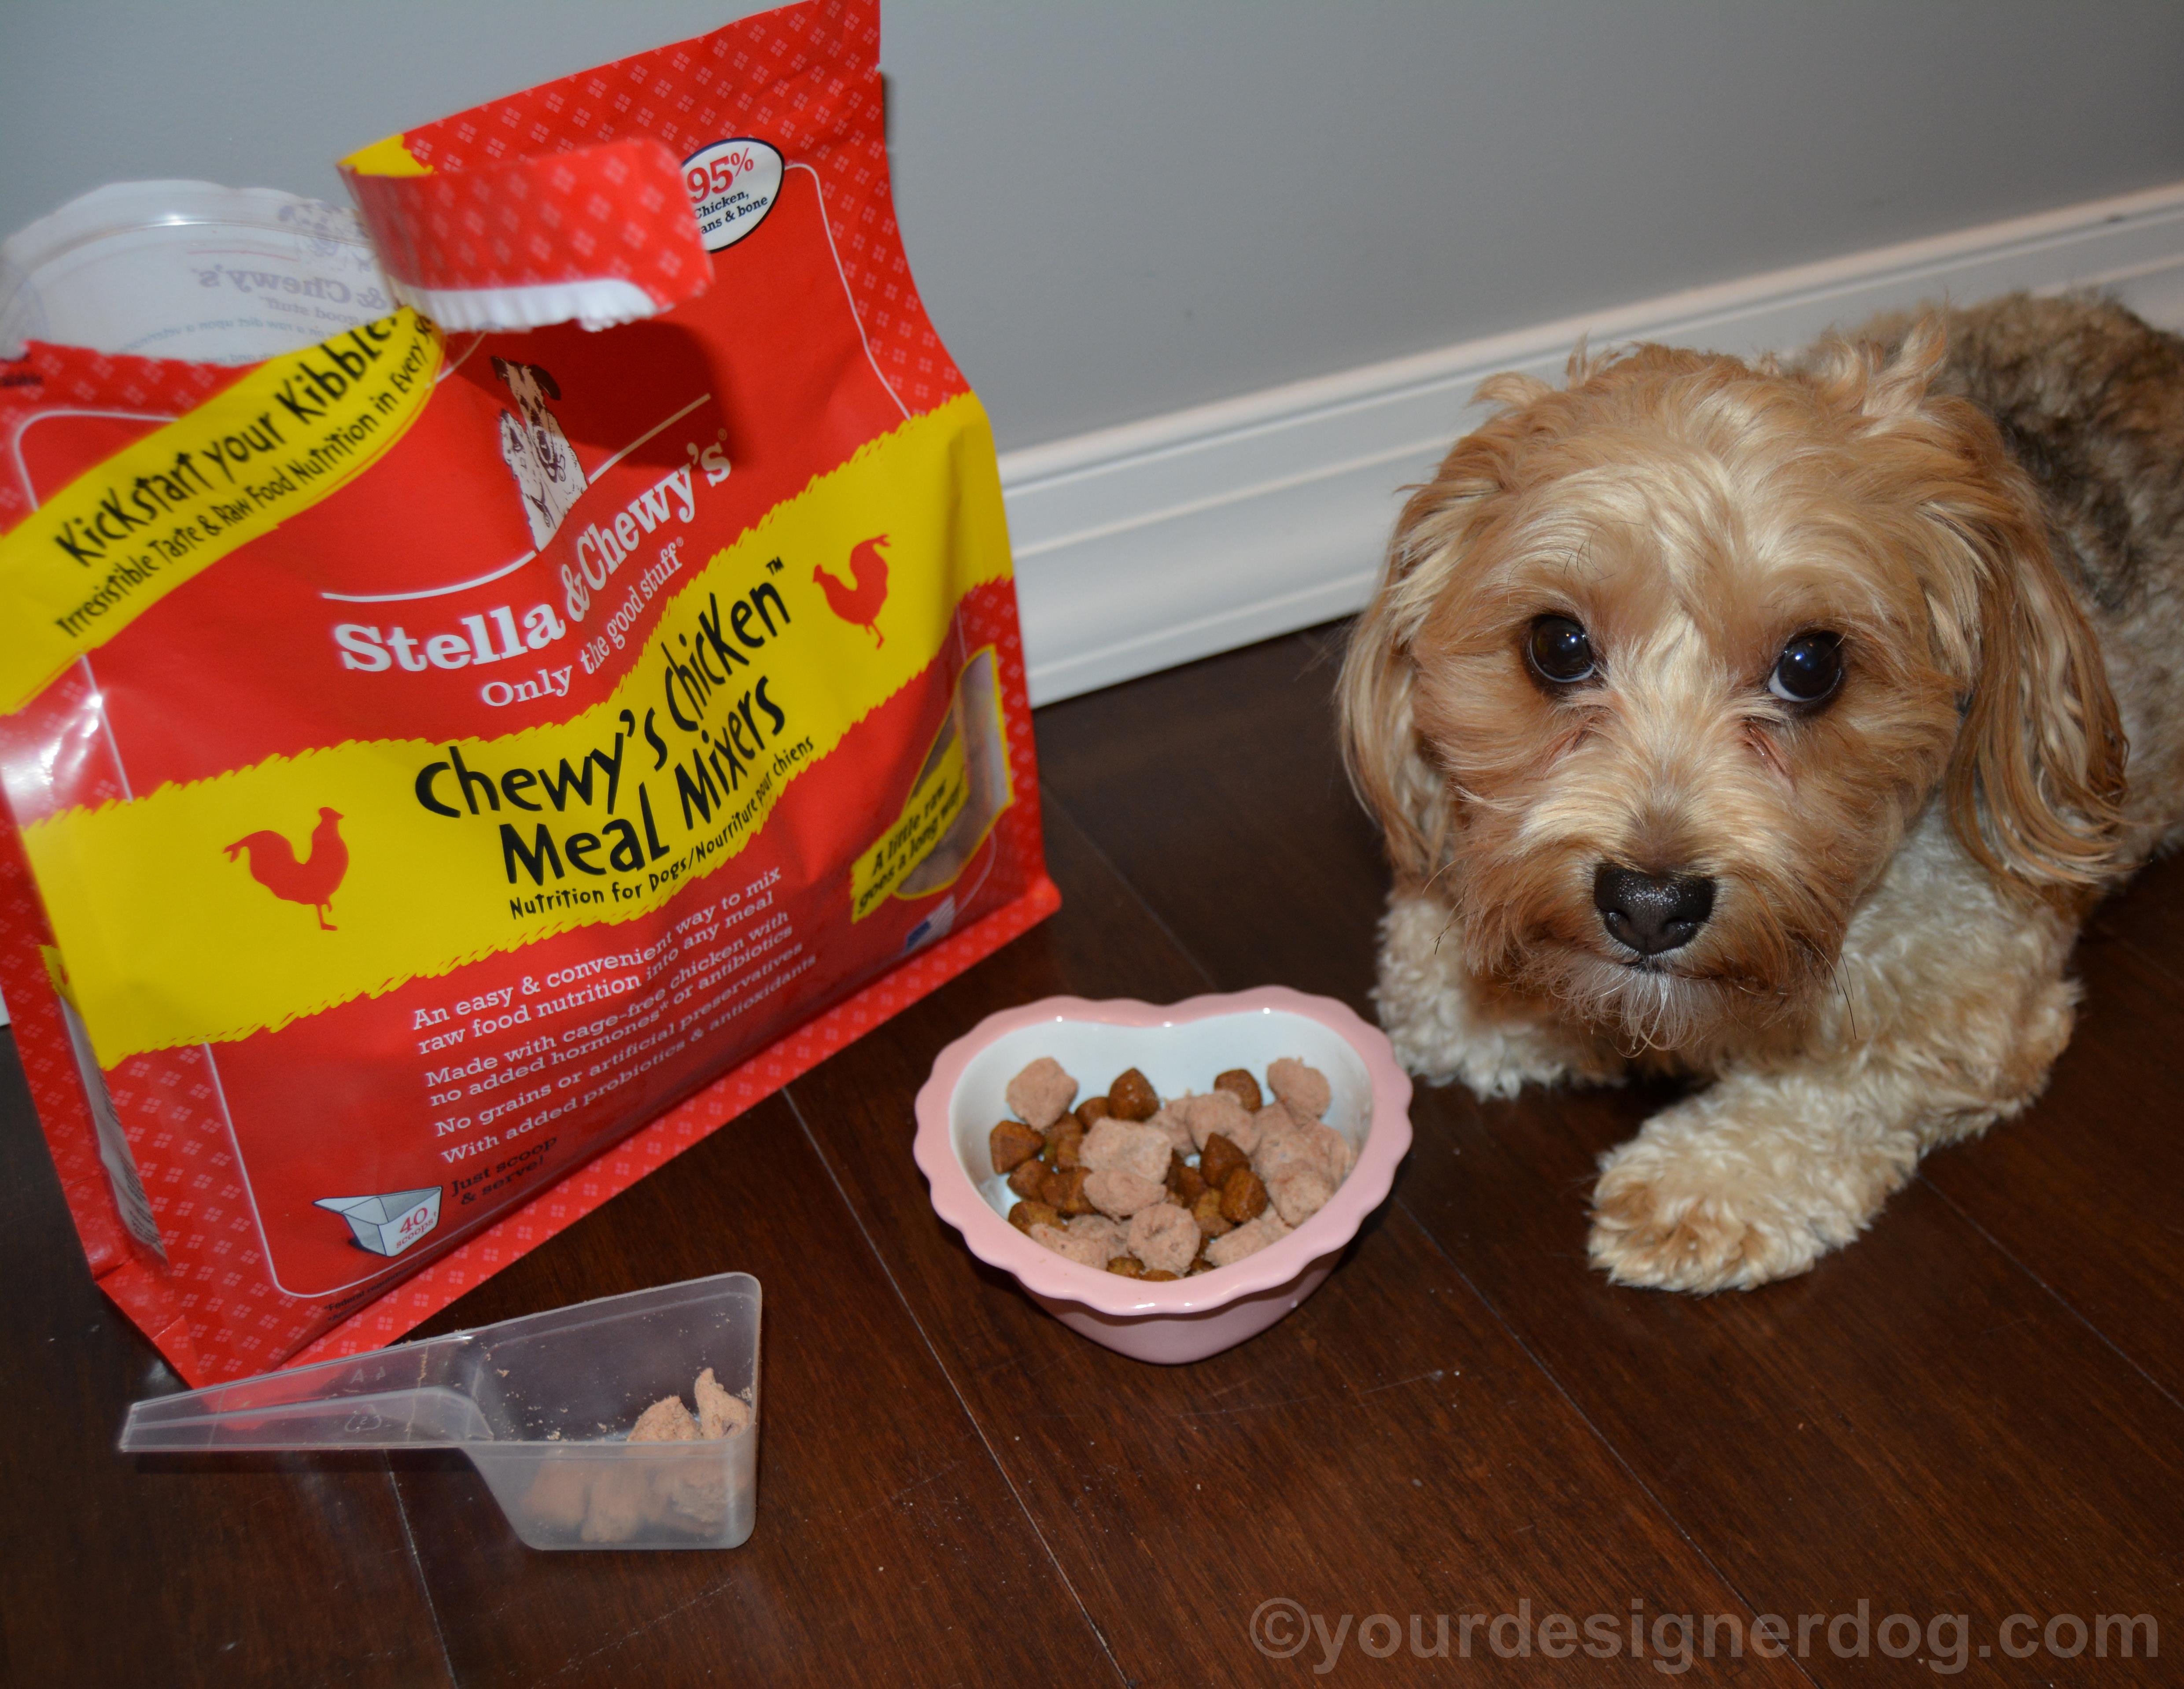 dogs, designer dogs, yorkipoo, yorkie poo, stella & chewy's, meal mixers, raw food, kibble